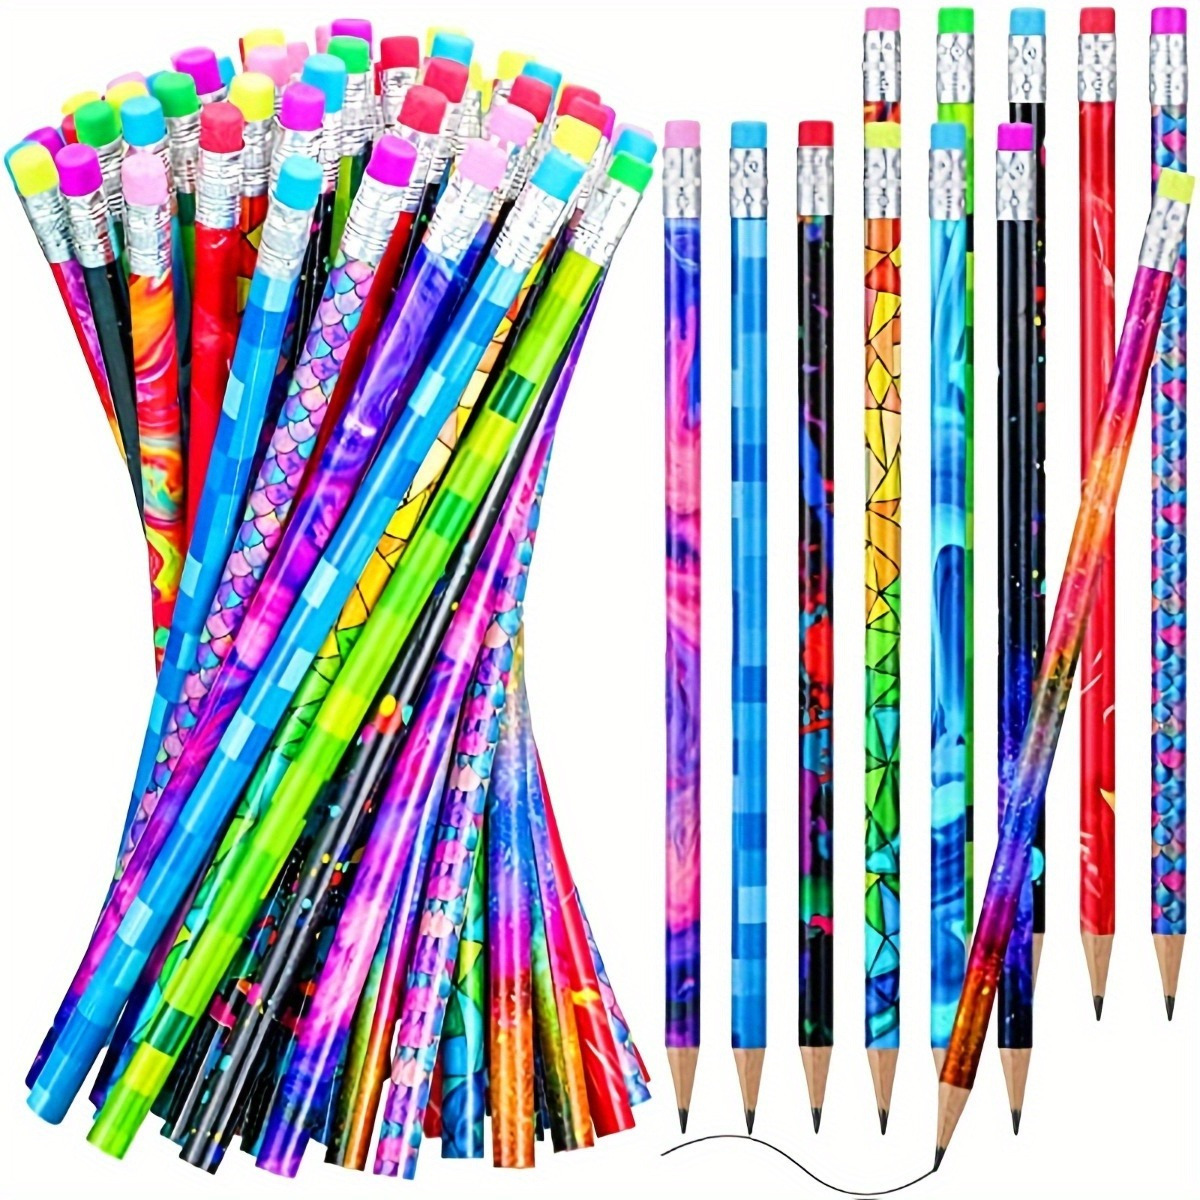 

50 Wooden Pencils With Erasers: Sketching Pencils For Students, Combination Pencils For Writing, School Supplies, Stationery